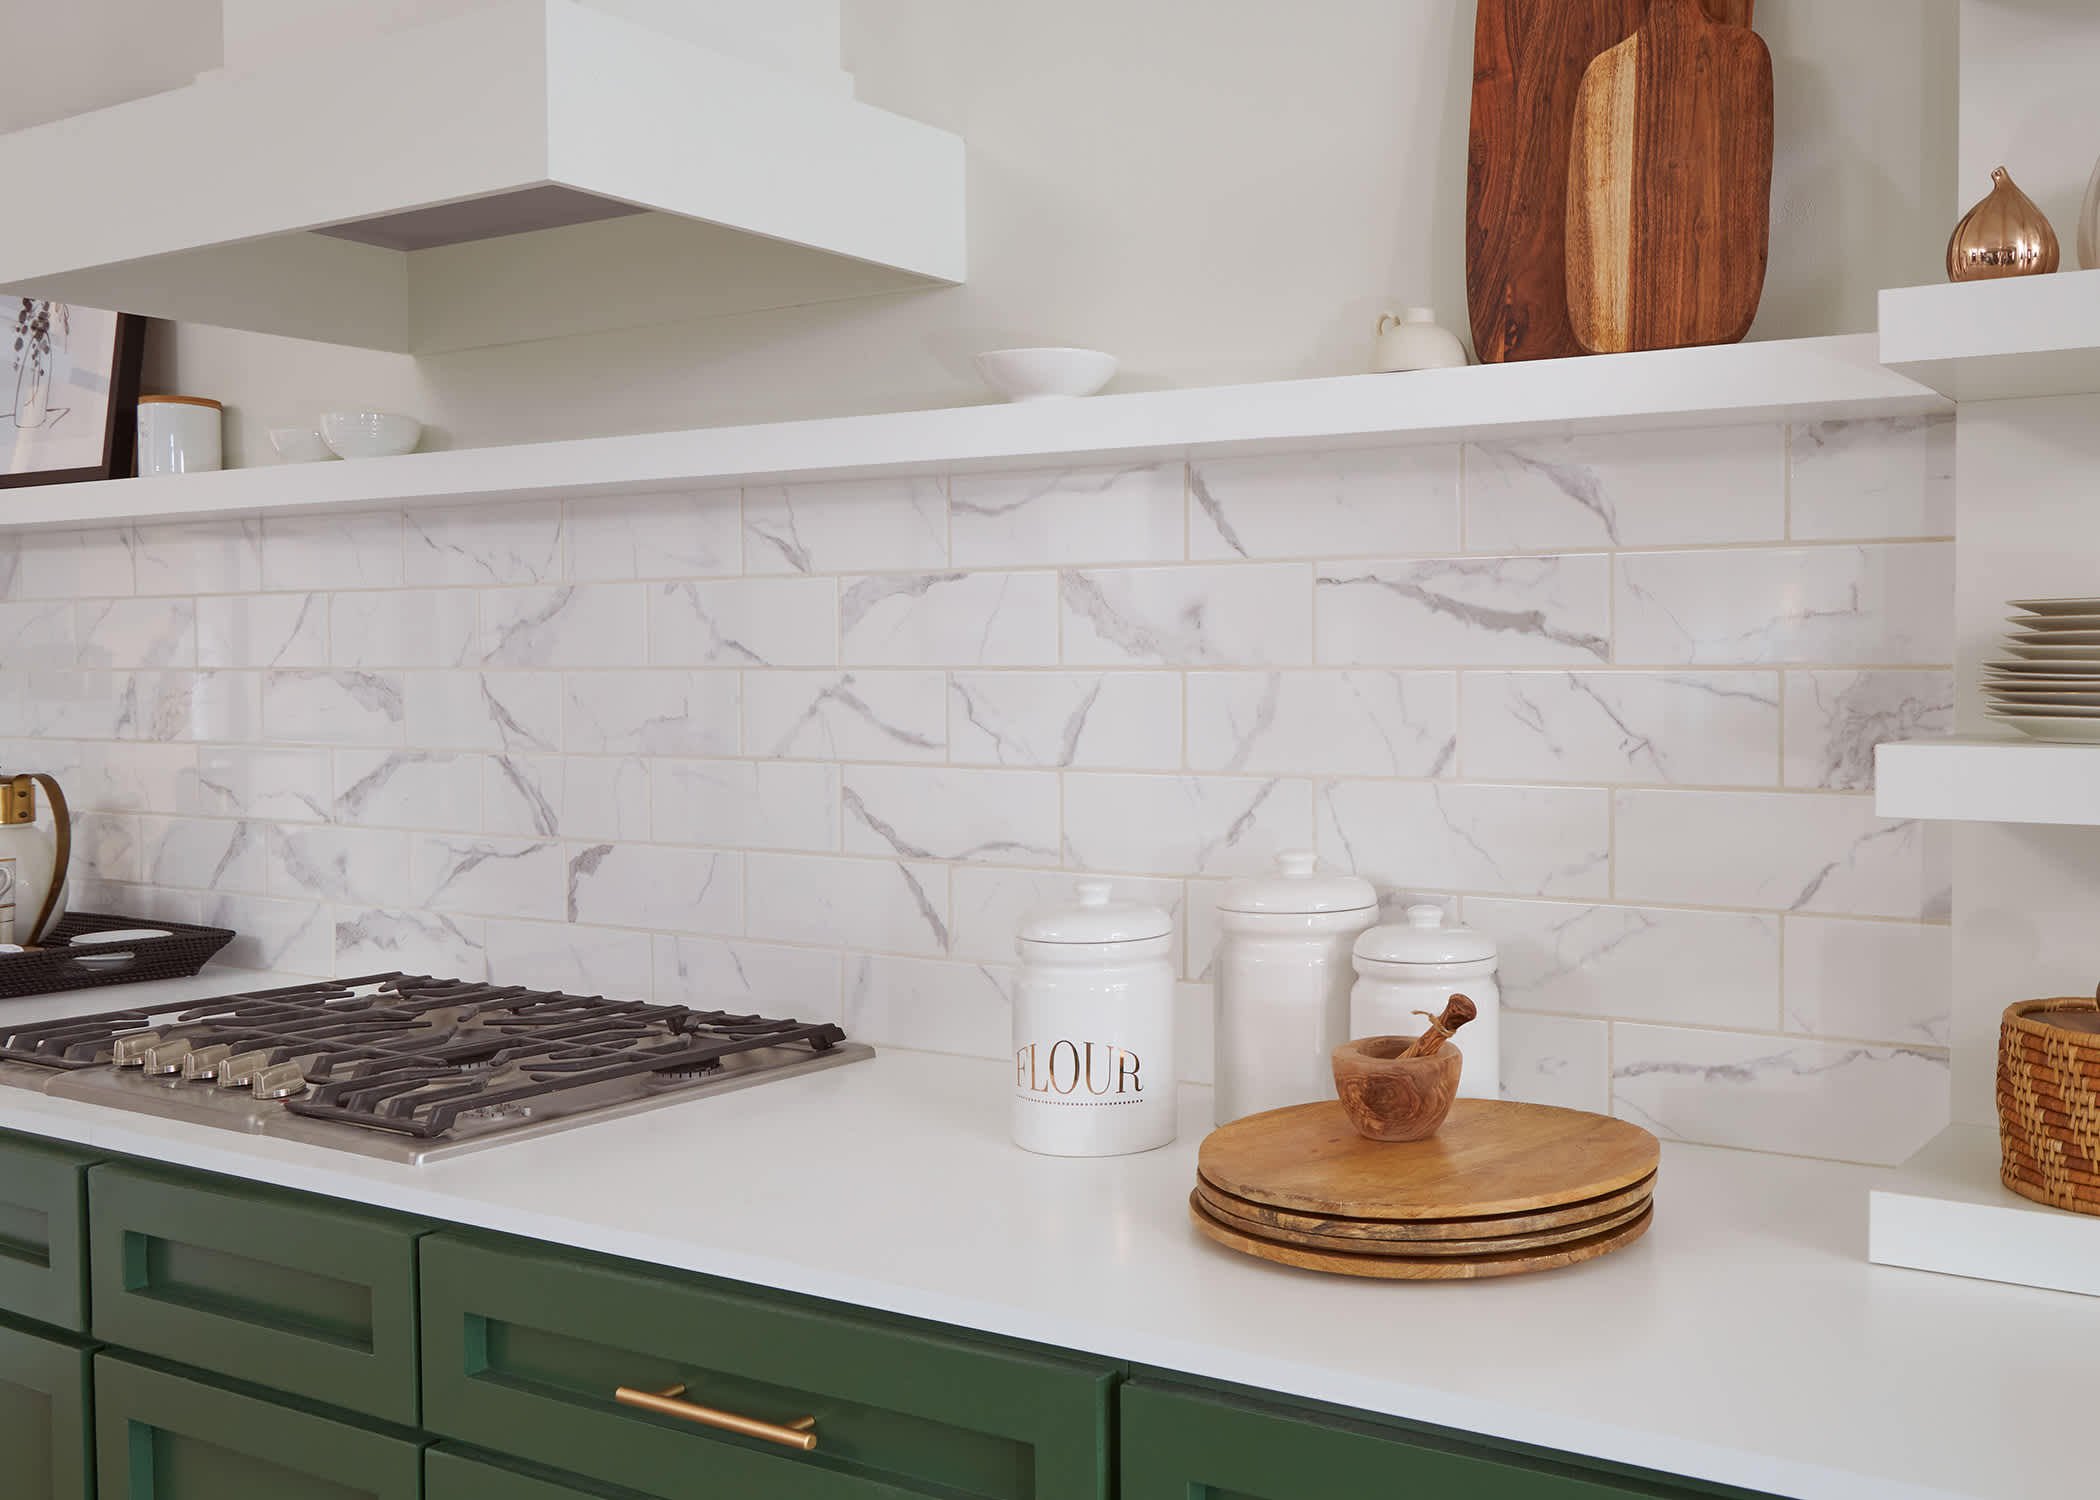 carrara subway tiles in kitchen with green cabinets and floating shelves